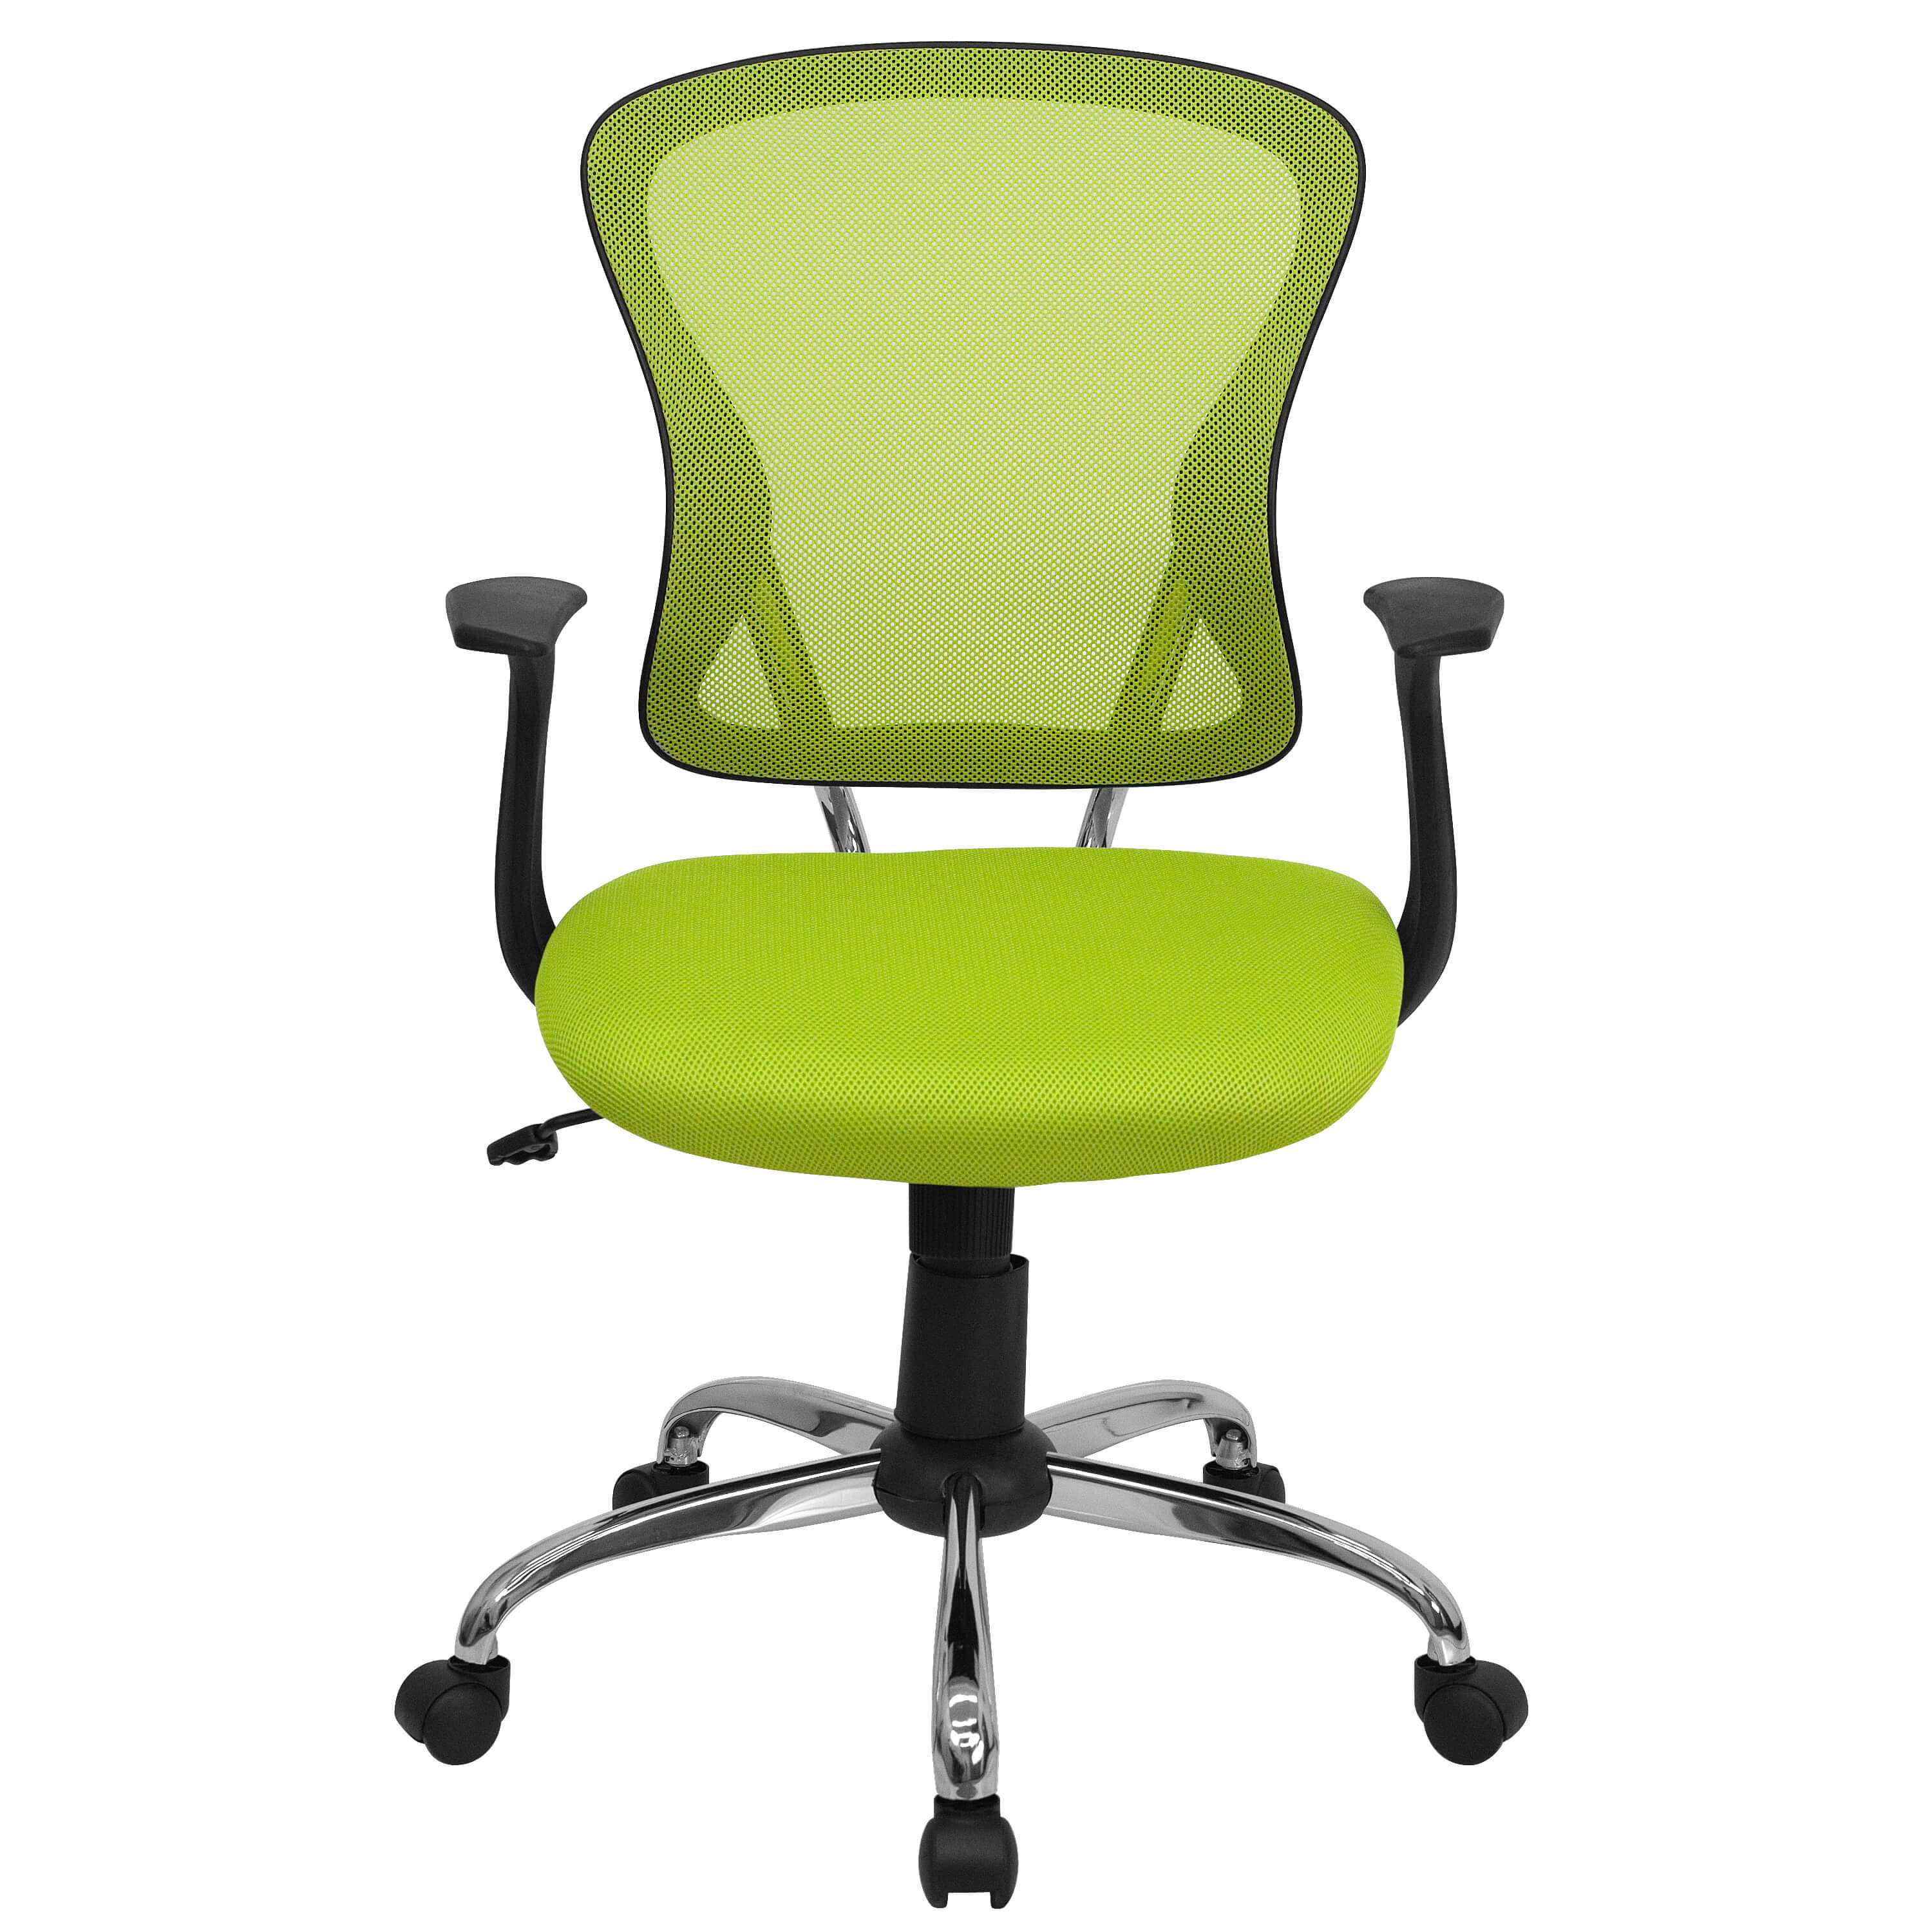 Colorful desk chairs CUB H 8369F GN GG FLA